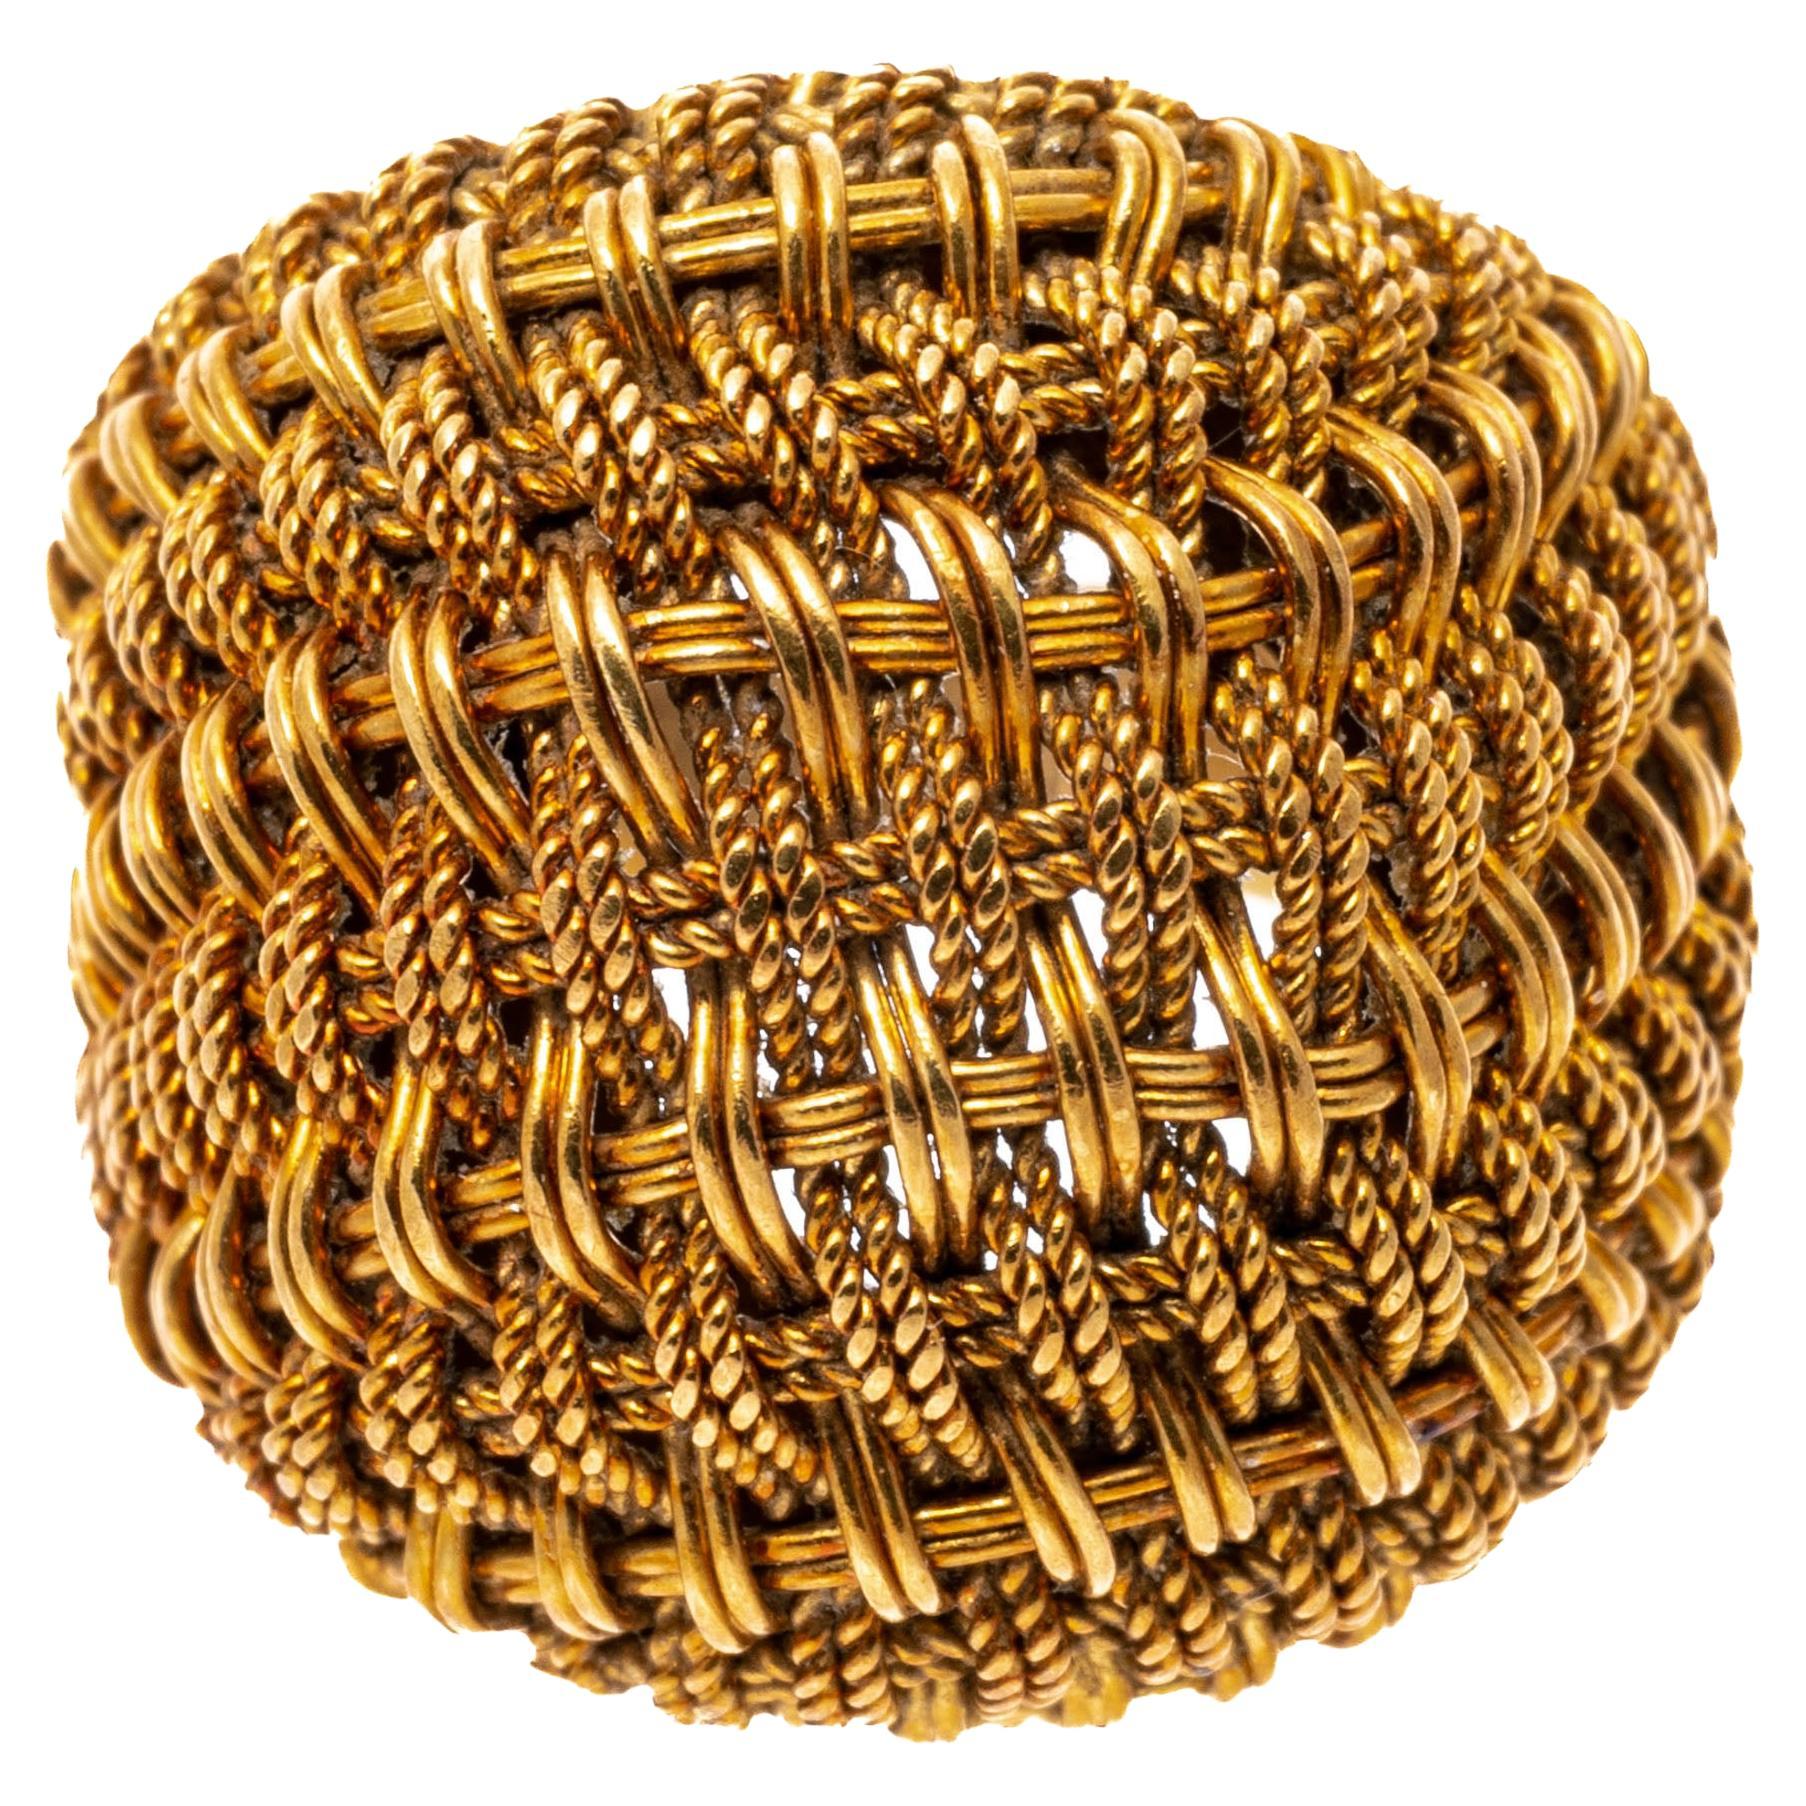 18k yellow gold ring. This interesting ring contains a wide dome style type, featuring a wovern basketweave design, which tapers to the shank in the back.
Marks: 18k
Dimensions: 11/16